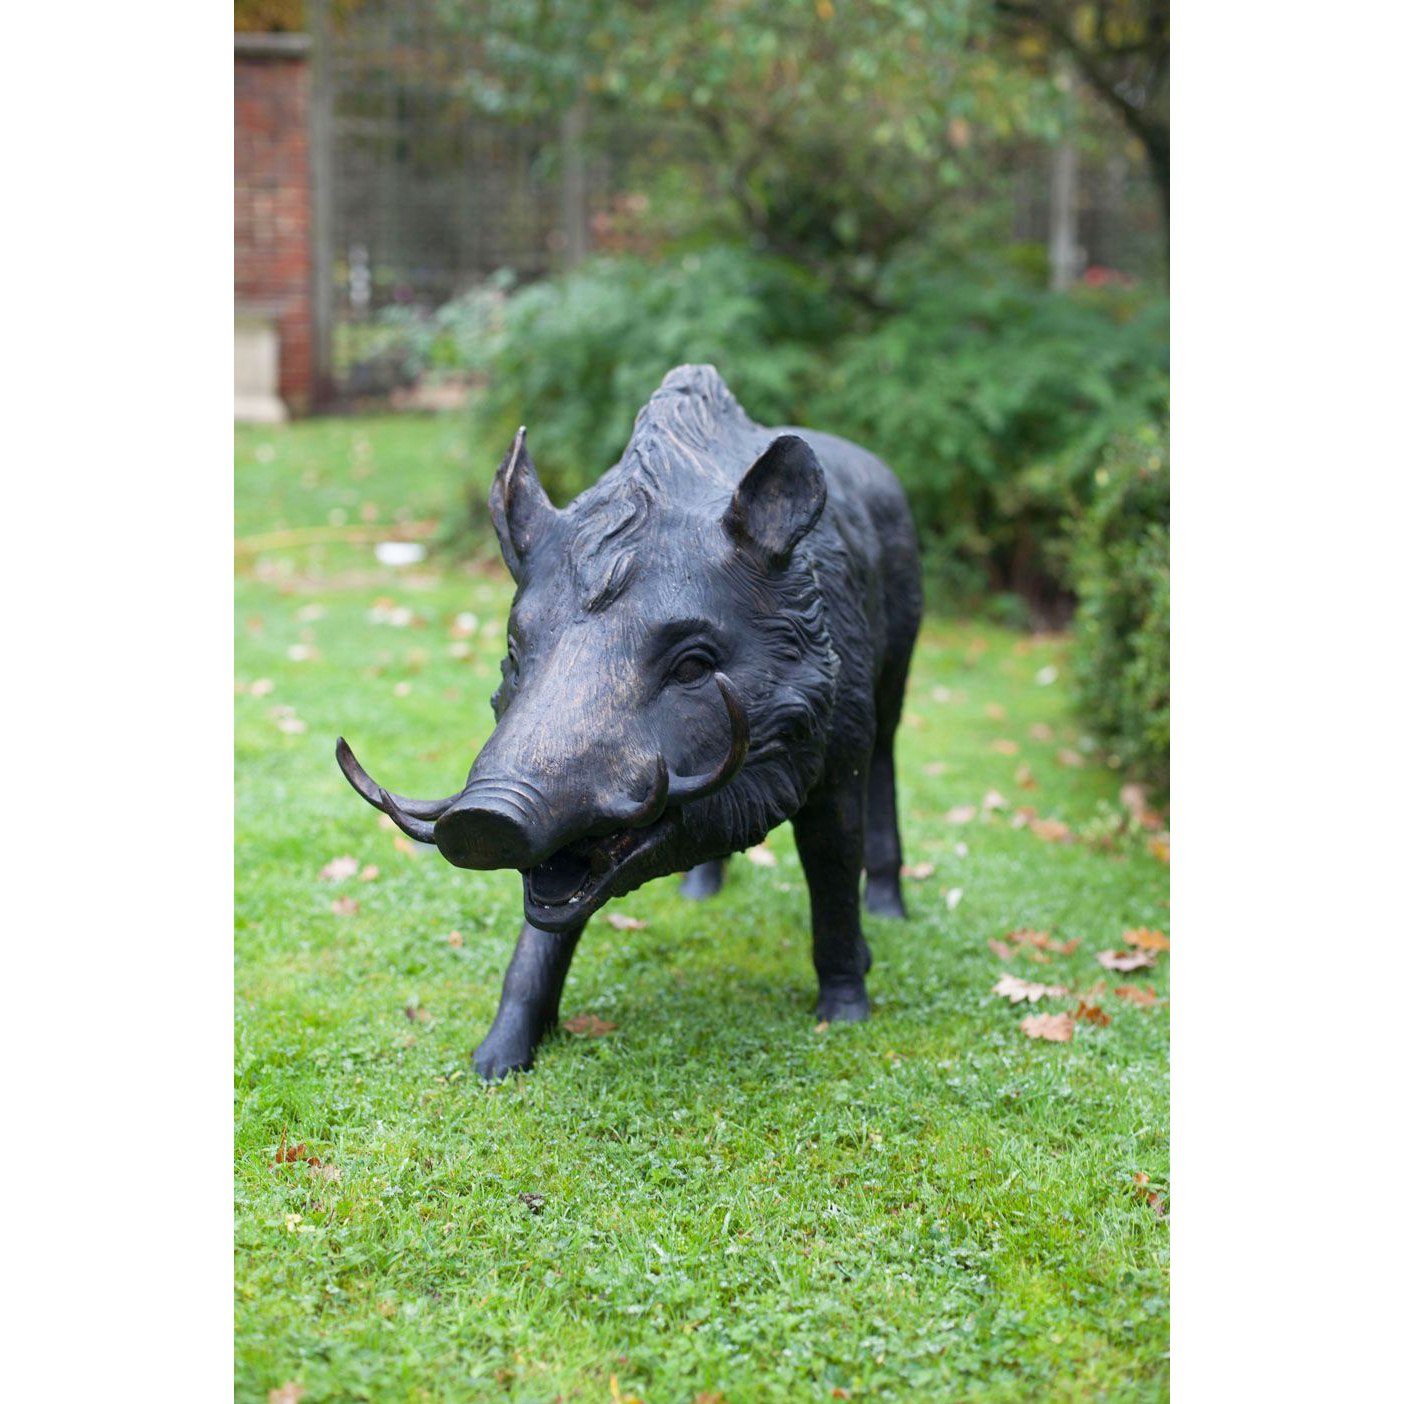 Black pig standing on the lawn bronze statue